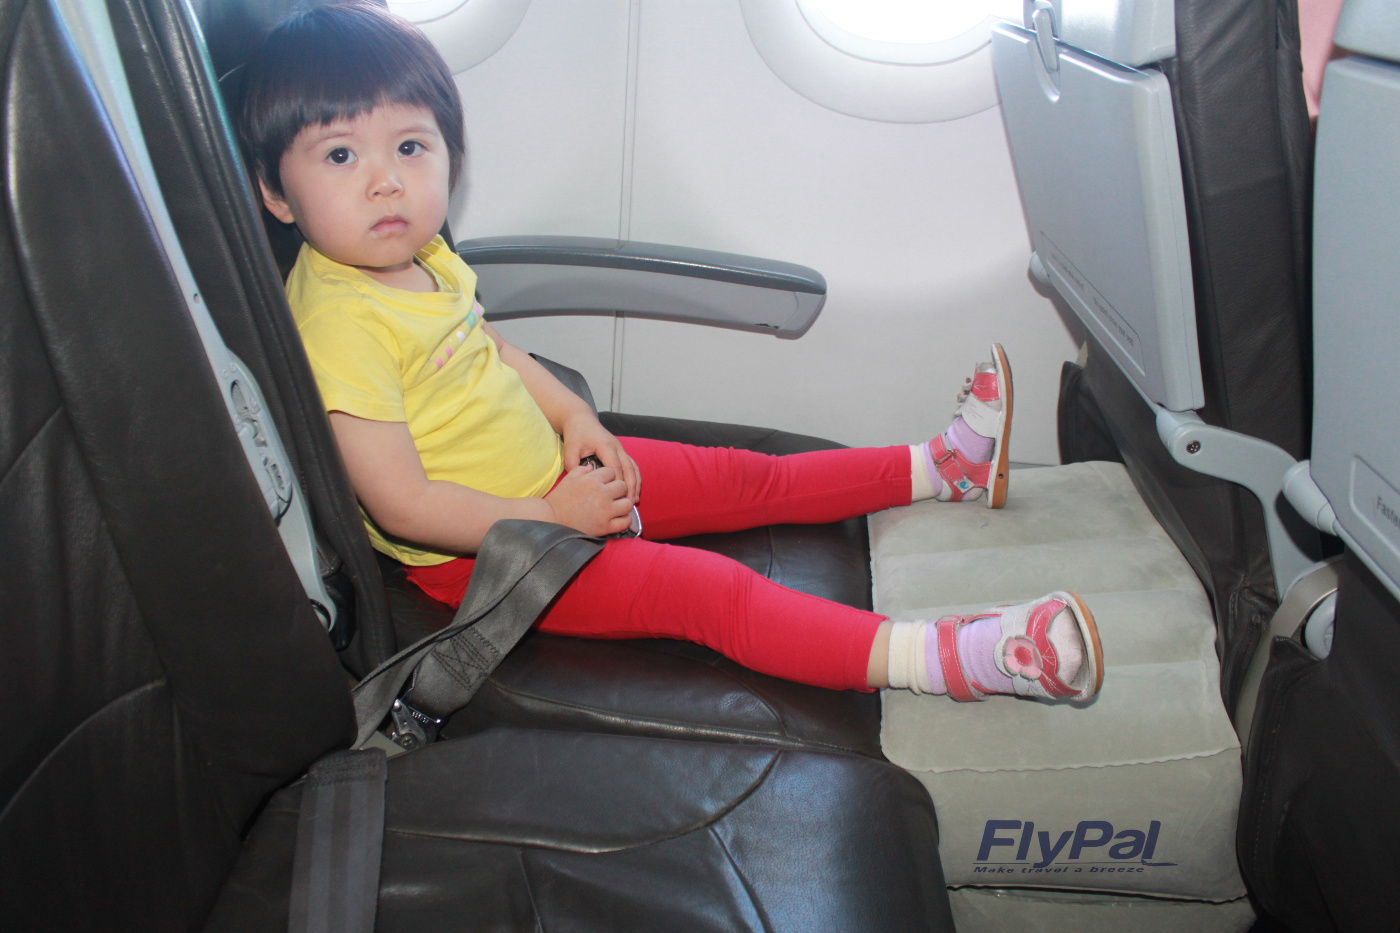 Travel Inflatable Footrest